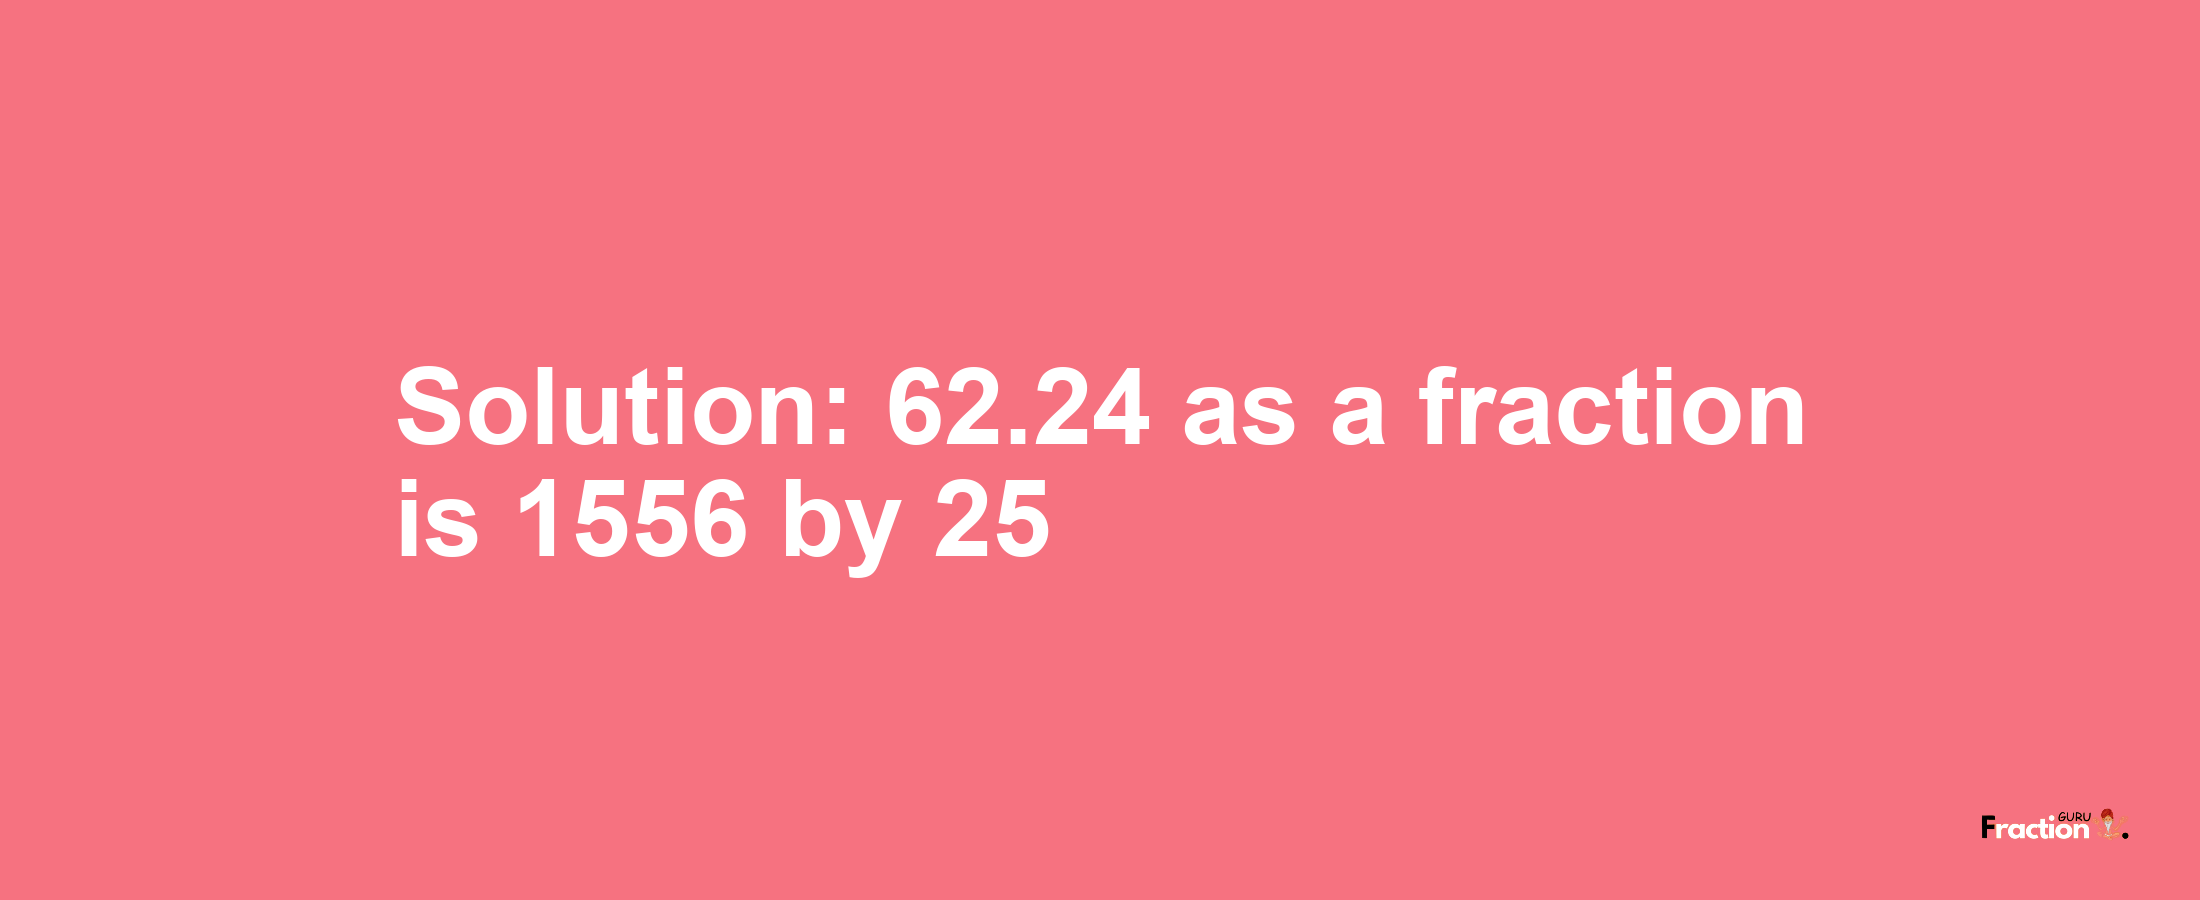 Solution:62.24 as a fraction is 1556/25